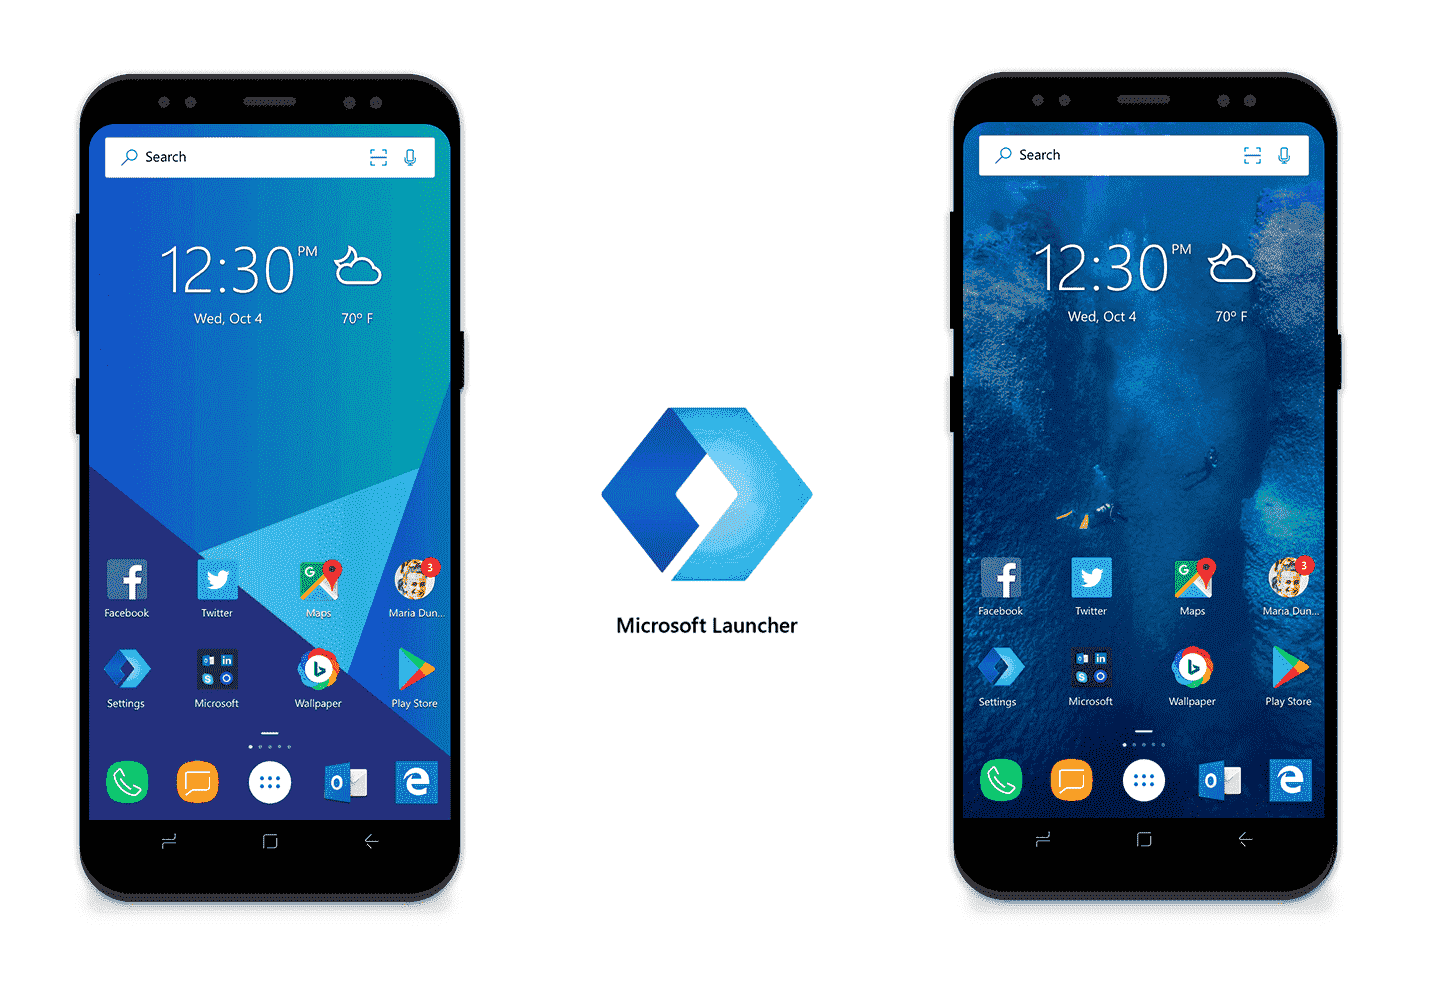 Microsoft Launcher’s new update brings Windows 10 Timeline to phones f8d914f0746fe7594075d0b98171885f.png